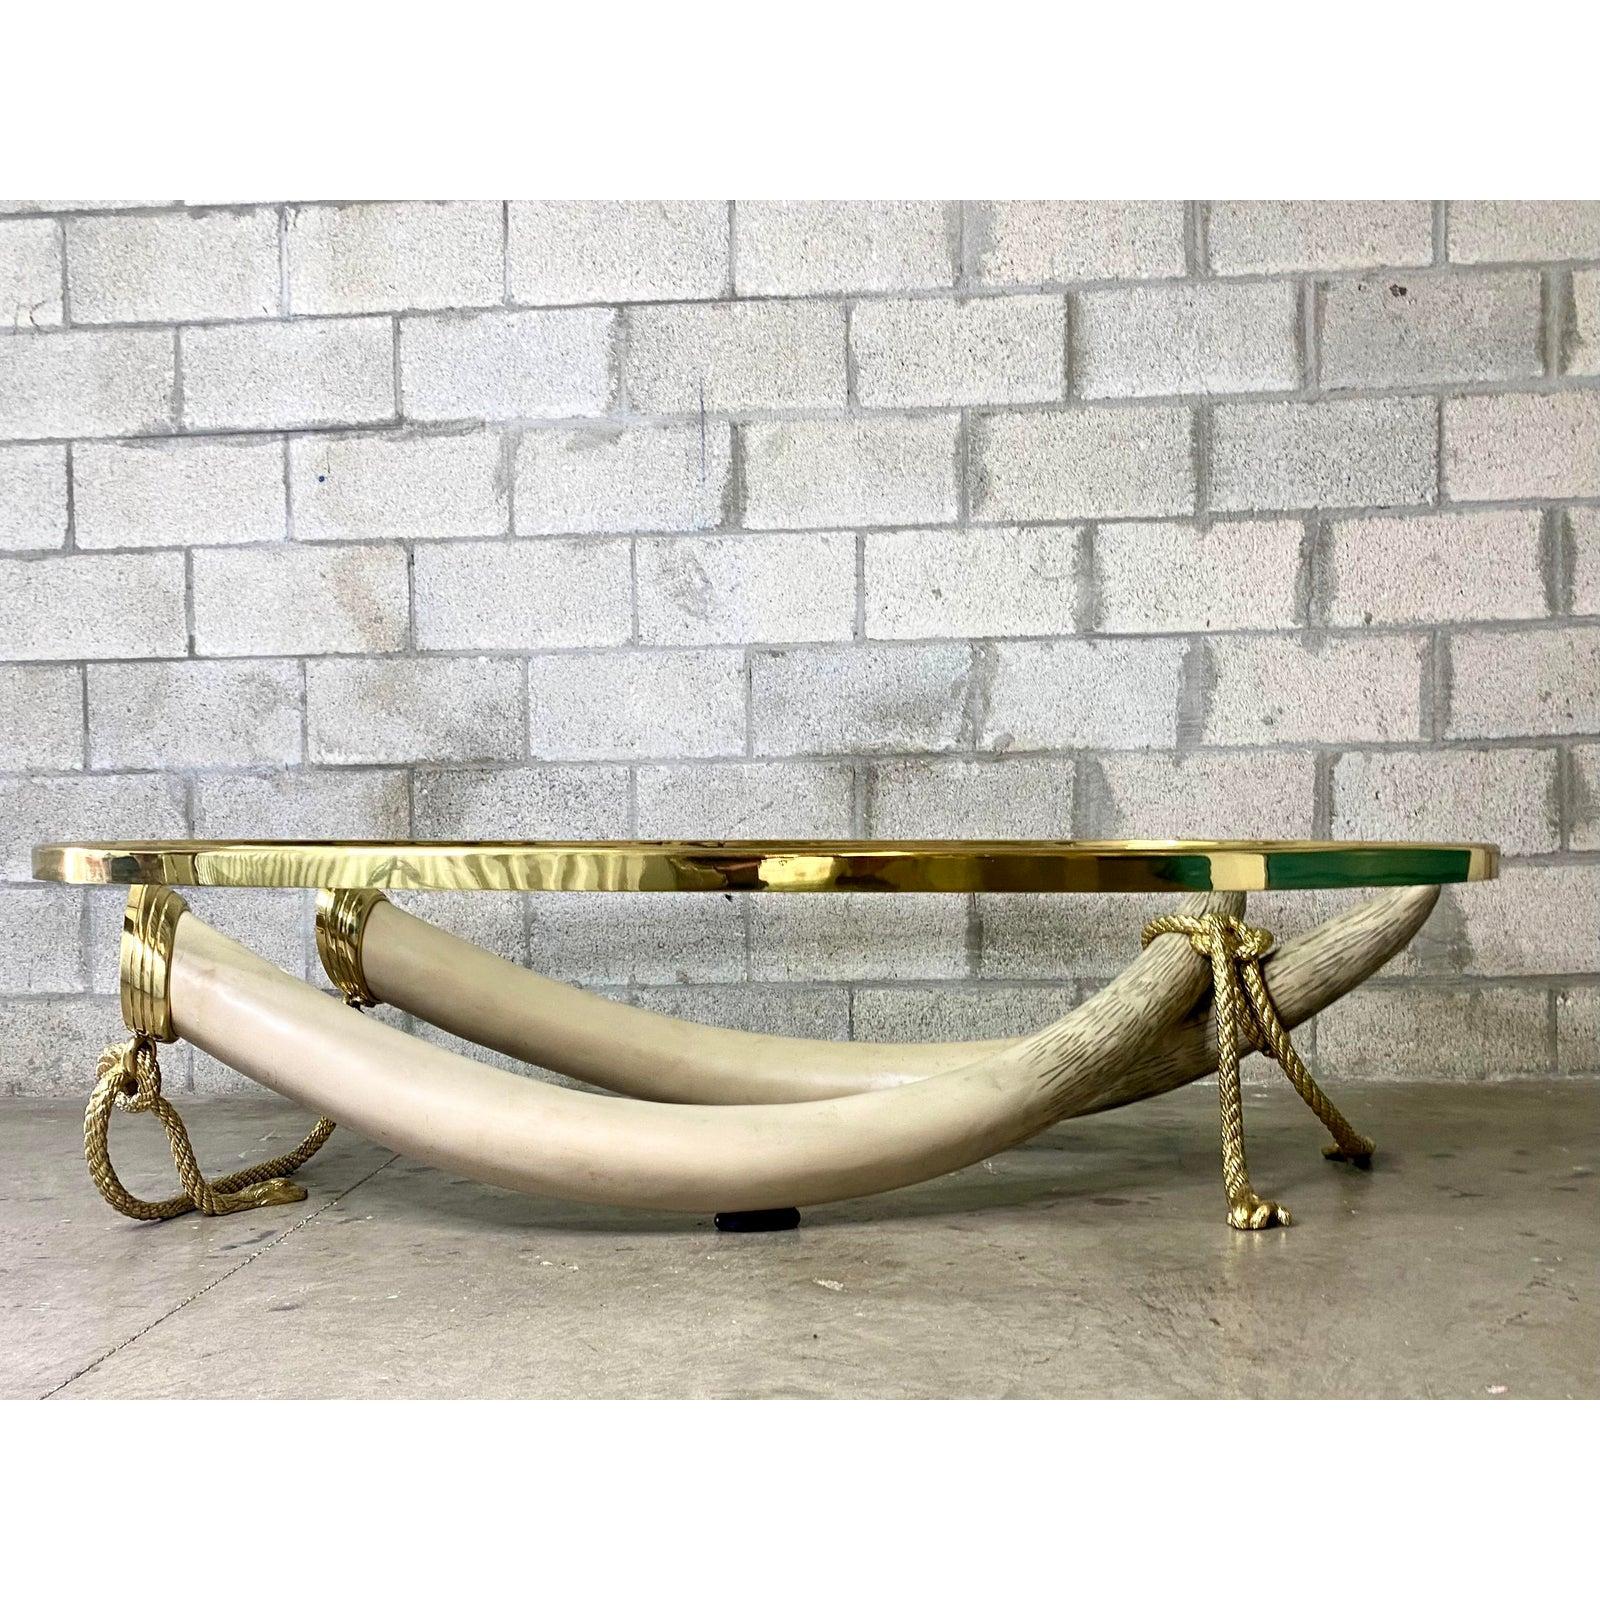 Spanish Vintage Regency 1970s Valenti Glass and Brass Faux Elephant Tusk Coffee Table